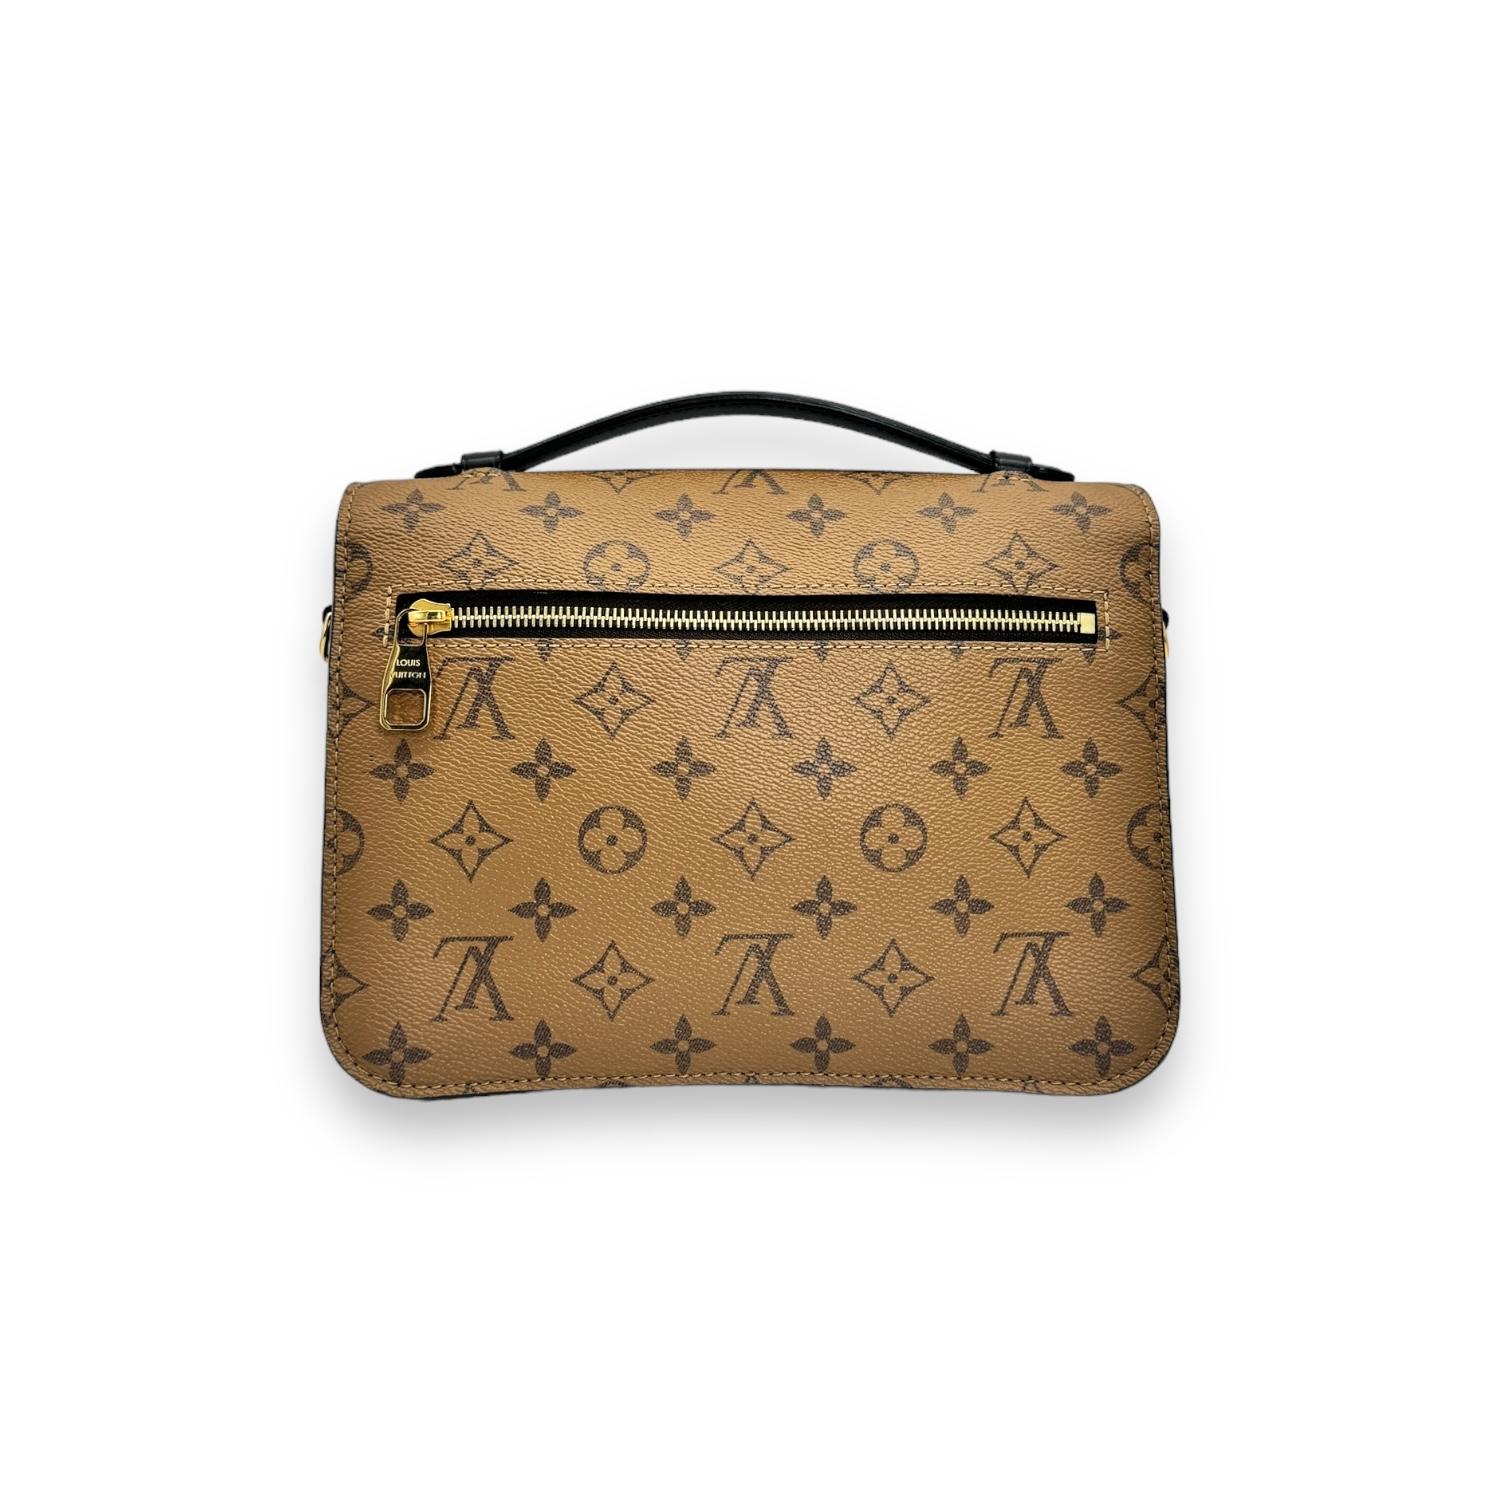 This chic messenger is finely crafted of Louis Vuitton monogram toile canvas. The bag features a lighter brown canvas flap and back, a black leather strap handle, an optional adjustable light brown monogram canvas shoulder strap, a rear exterior